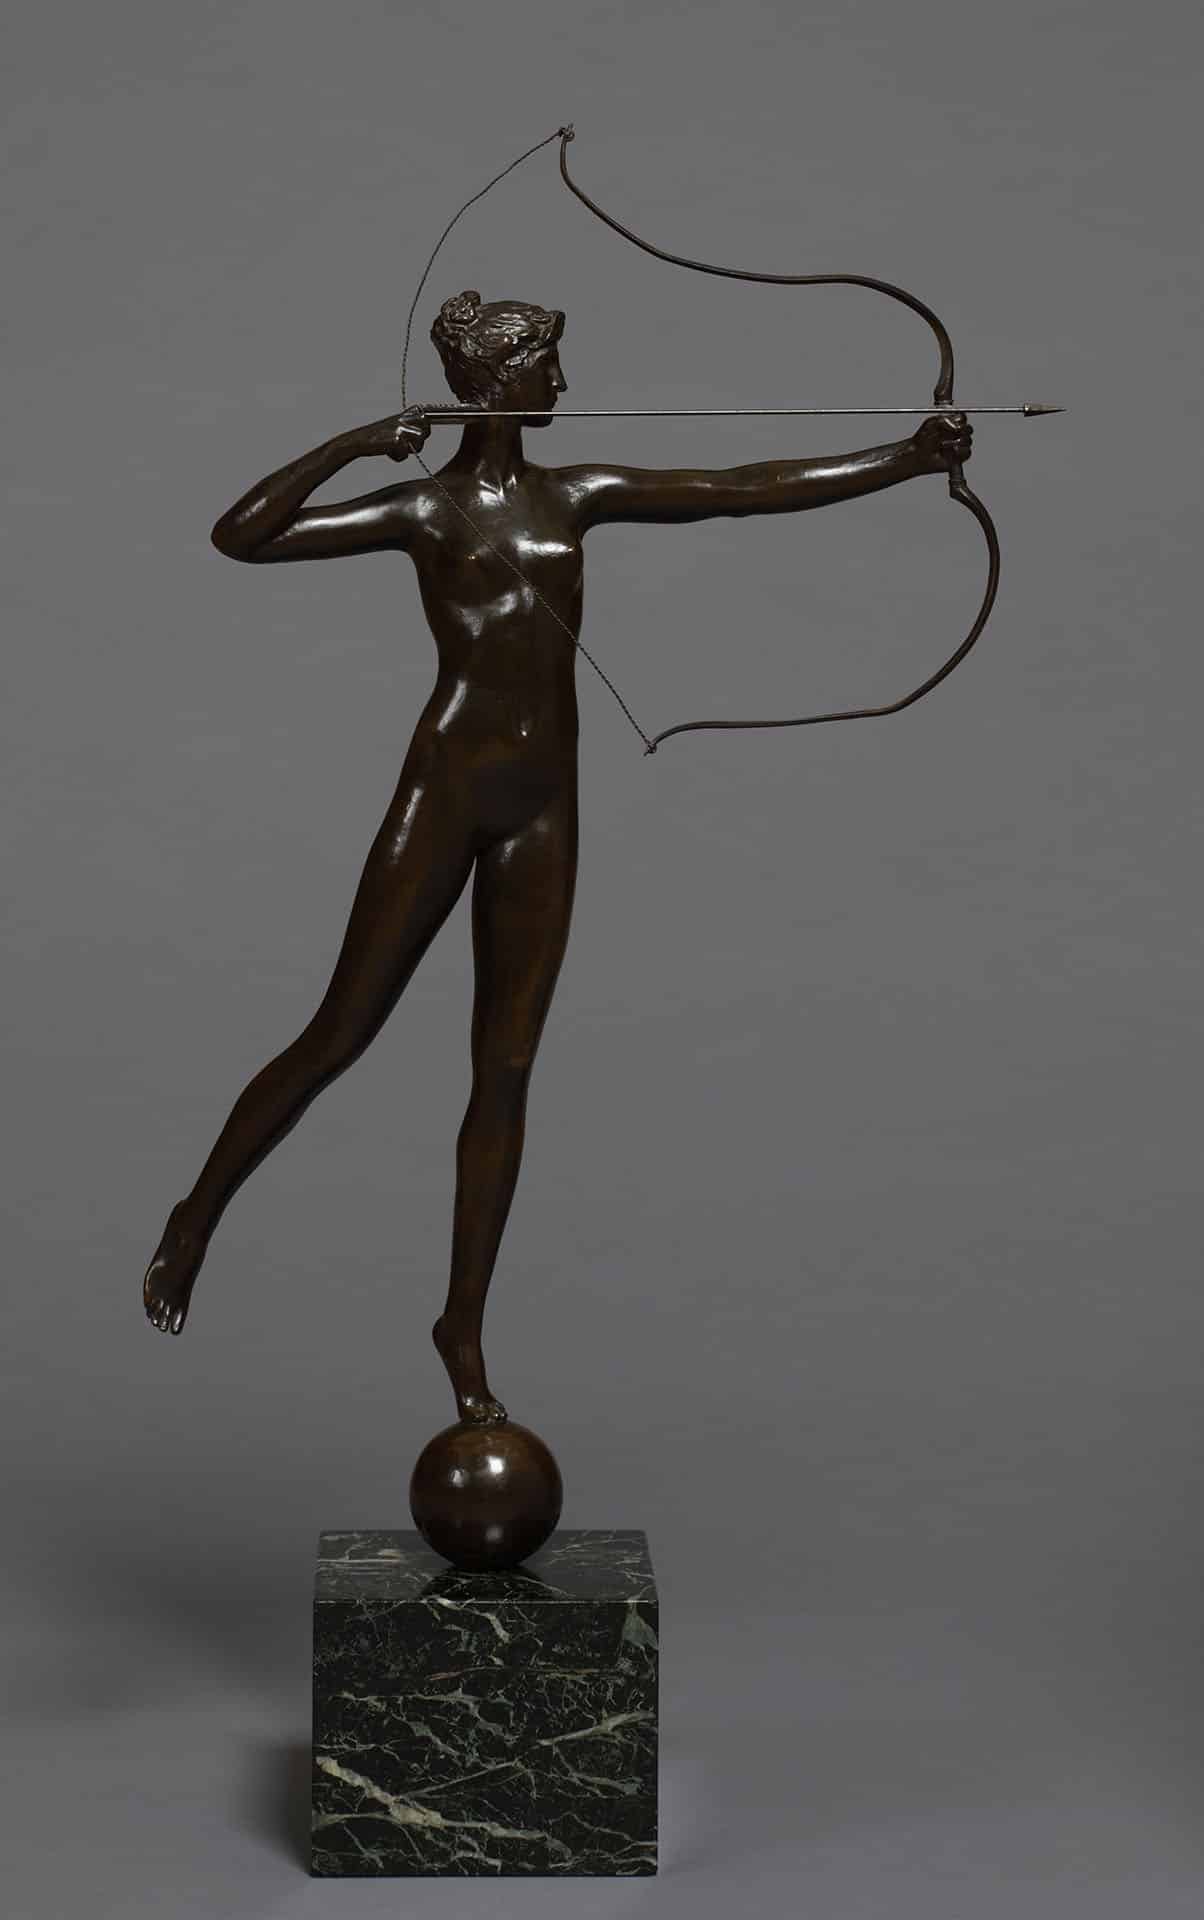 a bronze statue of a nude woman pulling an arrow back holding a bow